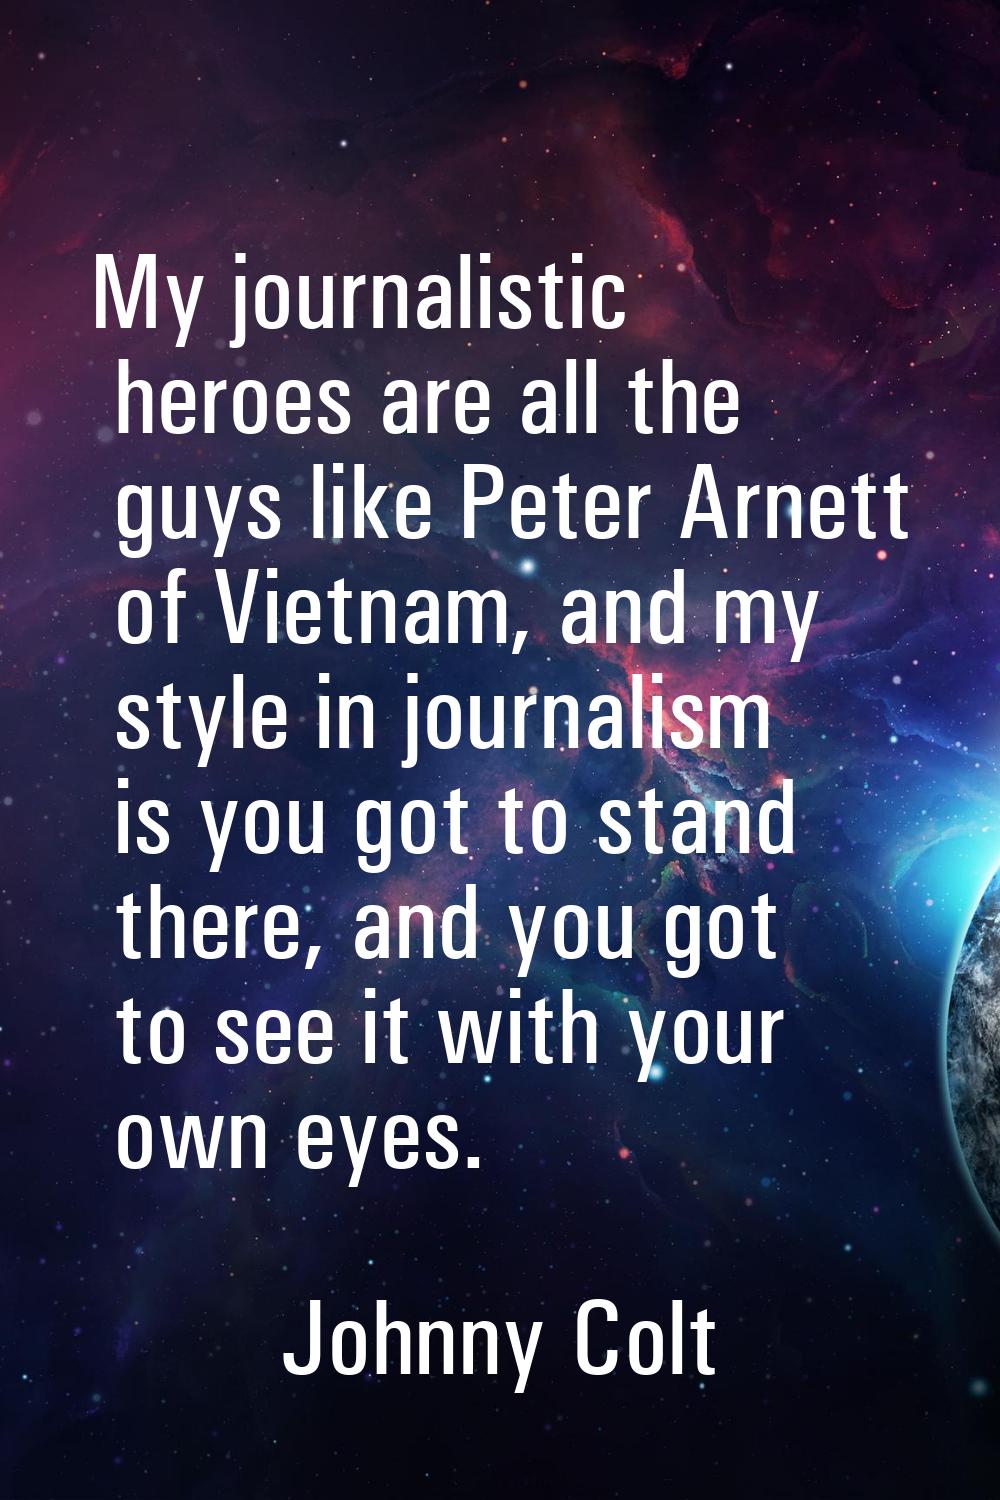 My journalistic heroes are all the guys like Peter Arnett of Vietnam, and my style in journalism is